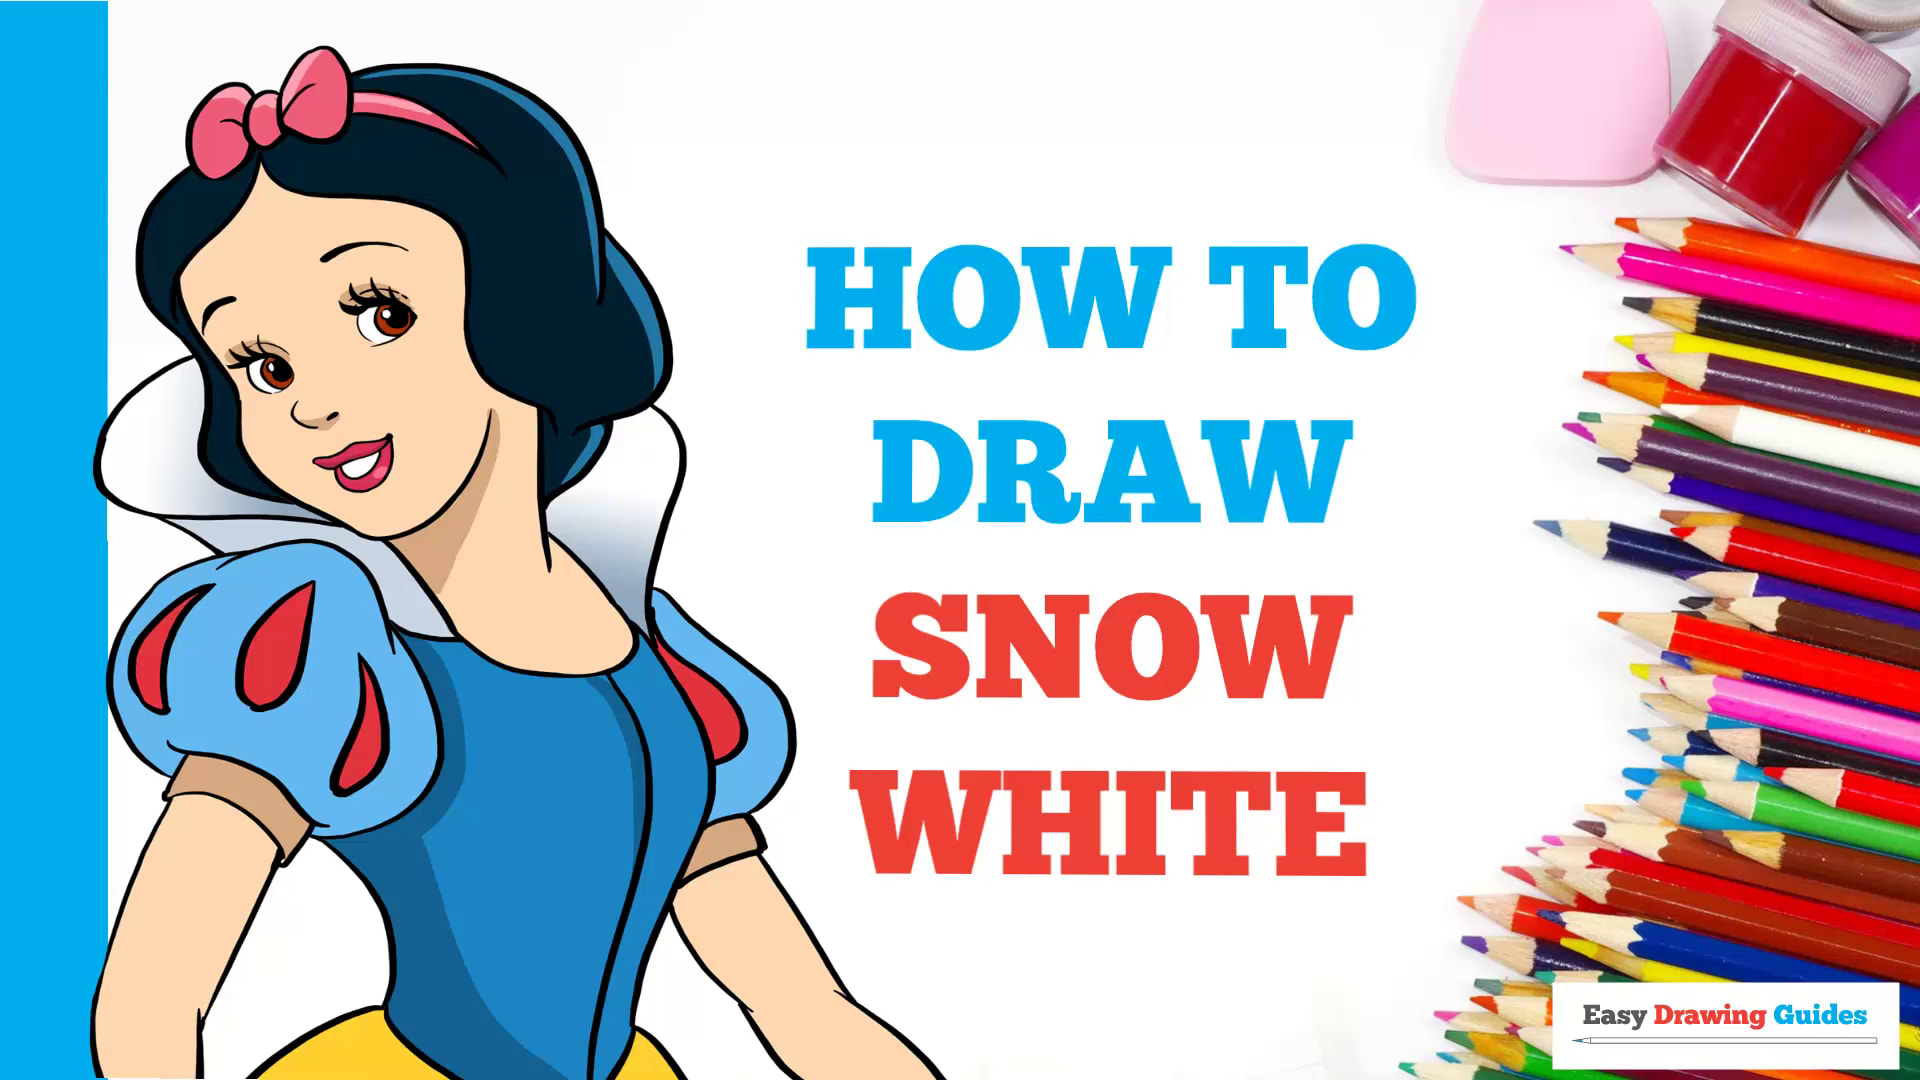 How to Draw Snow White - Really Easy Drawing Tutorial